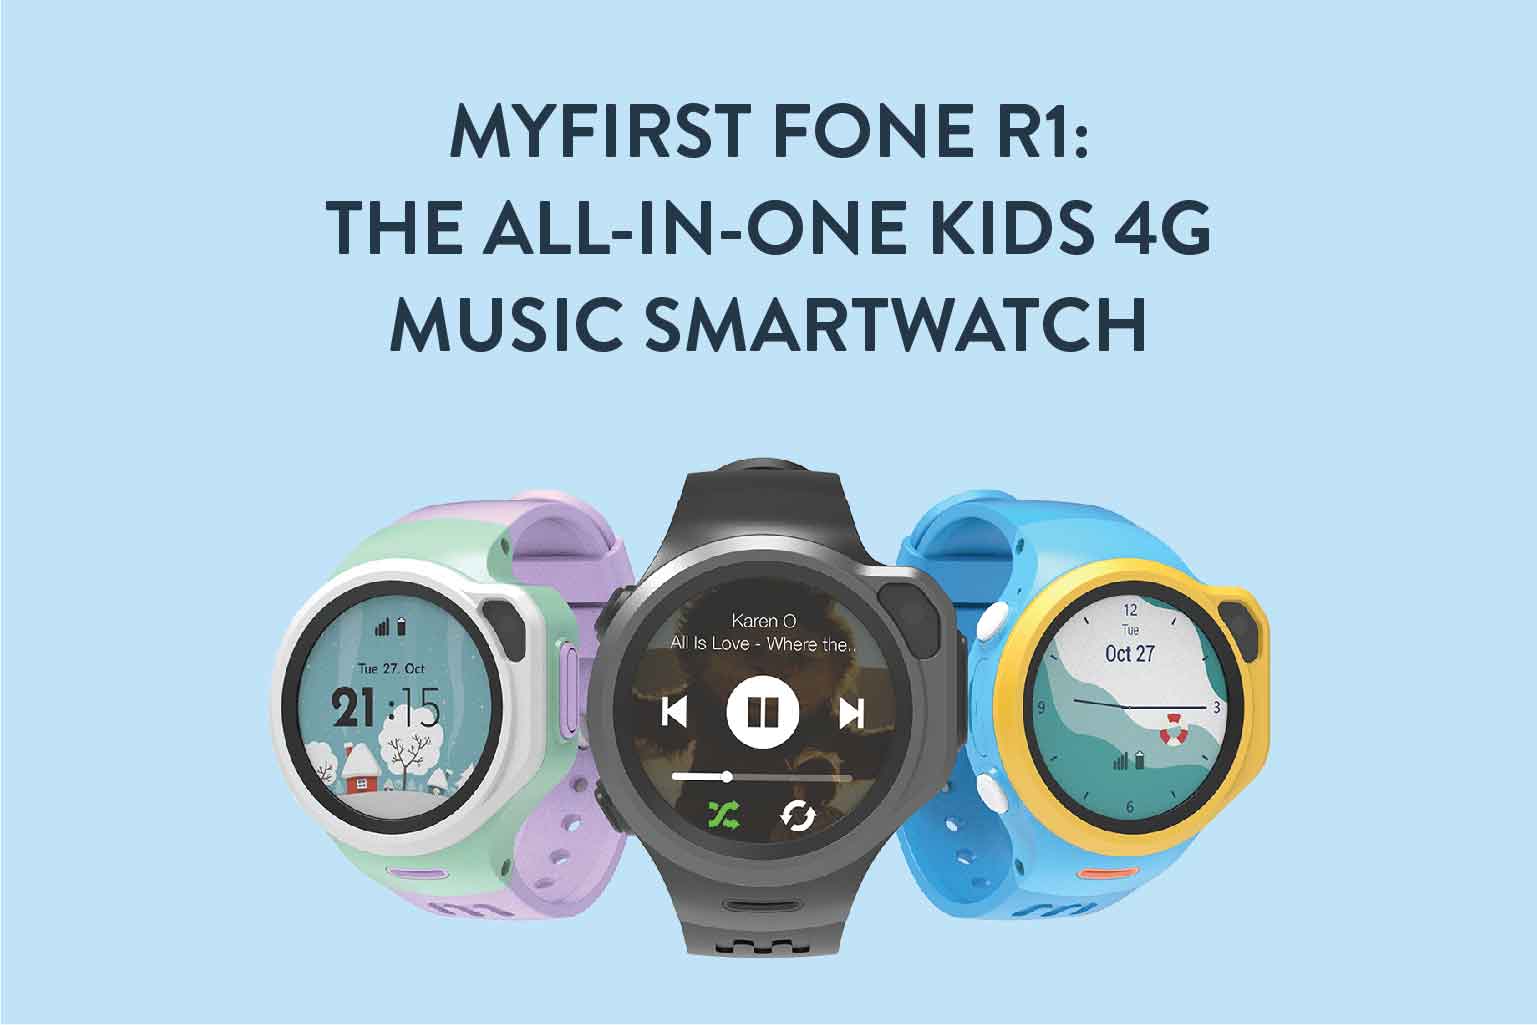 MyFirst Fone R1: The All-In-One Kids 4G Music Smart Watch